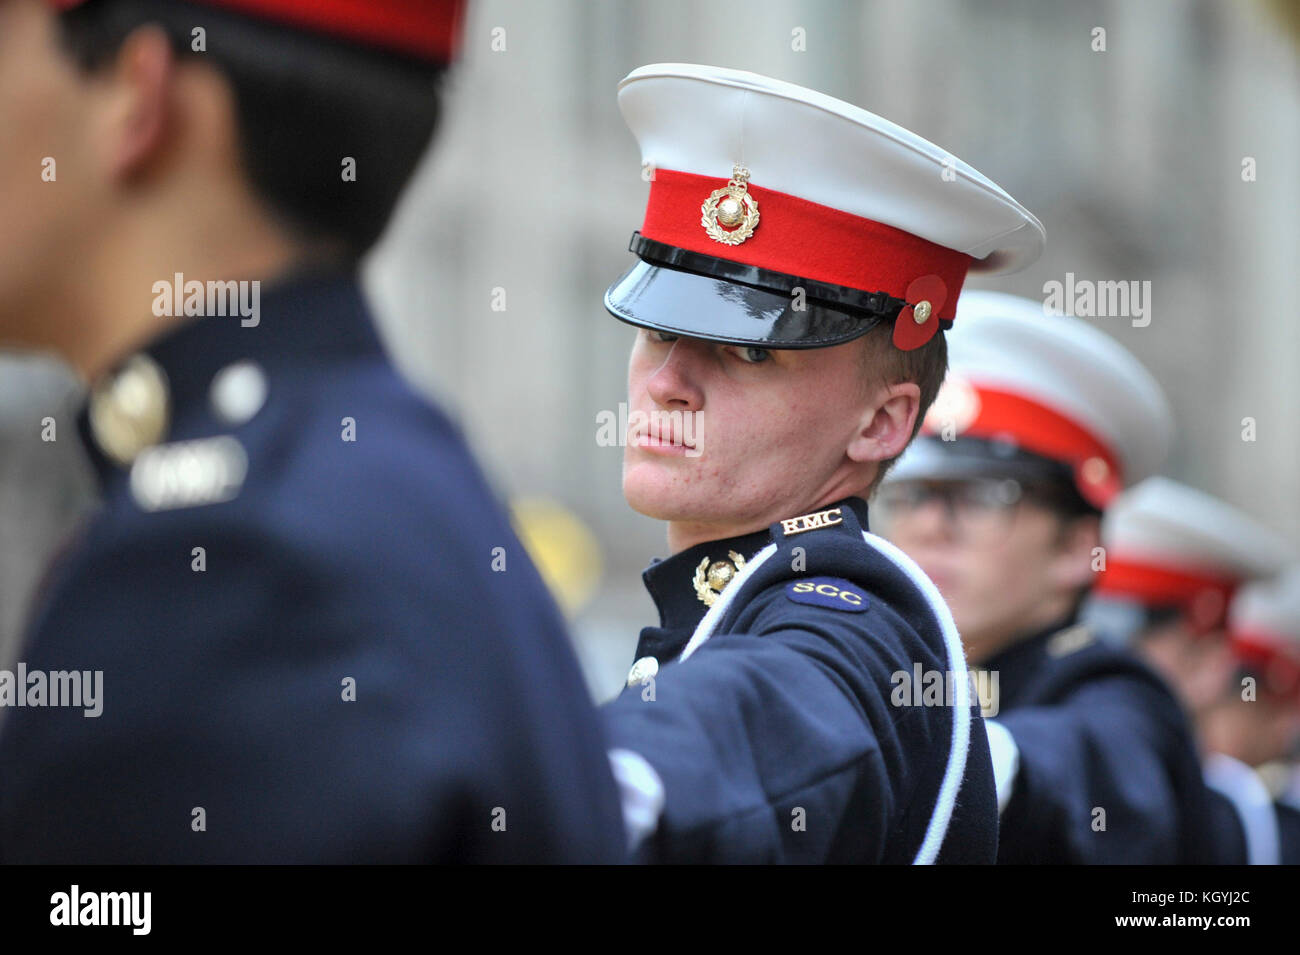 London, UK. 11th Nov, 2017. Cadets line up outside St. Paul's Cathedral during The Lord Mayor's Show, the oldest and grandest civic procession in the world. For over 800 years, the newly elected Lord Mayor of London makes his or her way from the City to distant Westminster to swear loyalty to the Crown. Credit: Stephen Chung/Alamy Live News Stock Photo